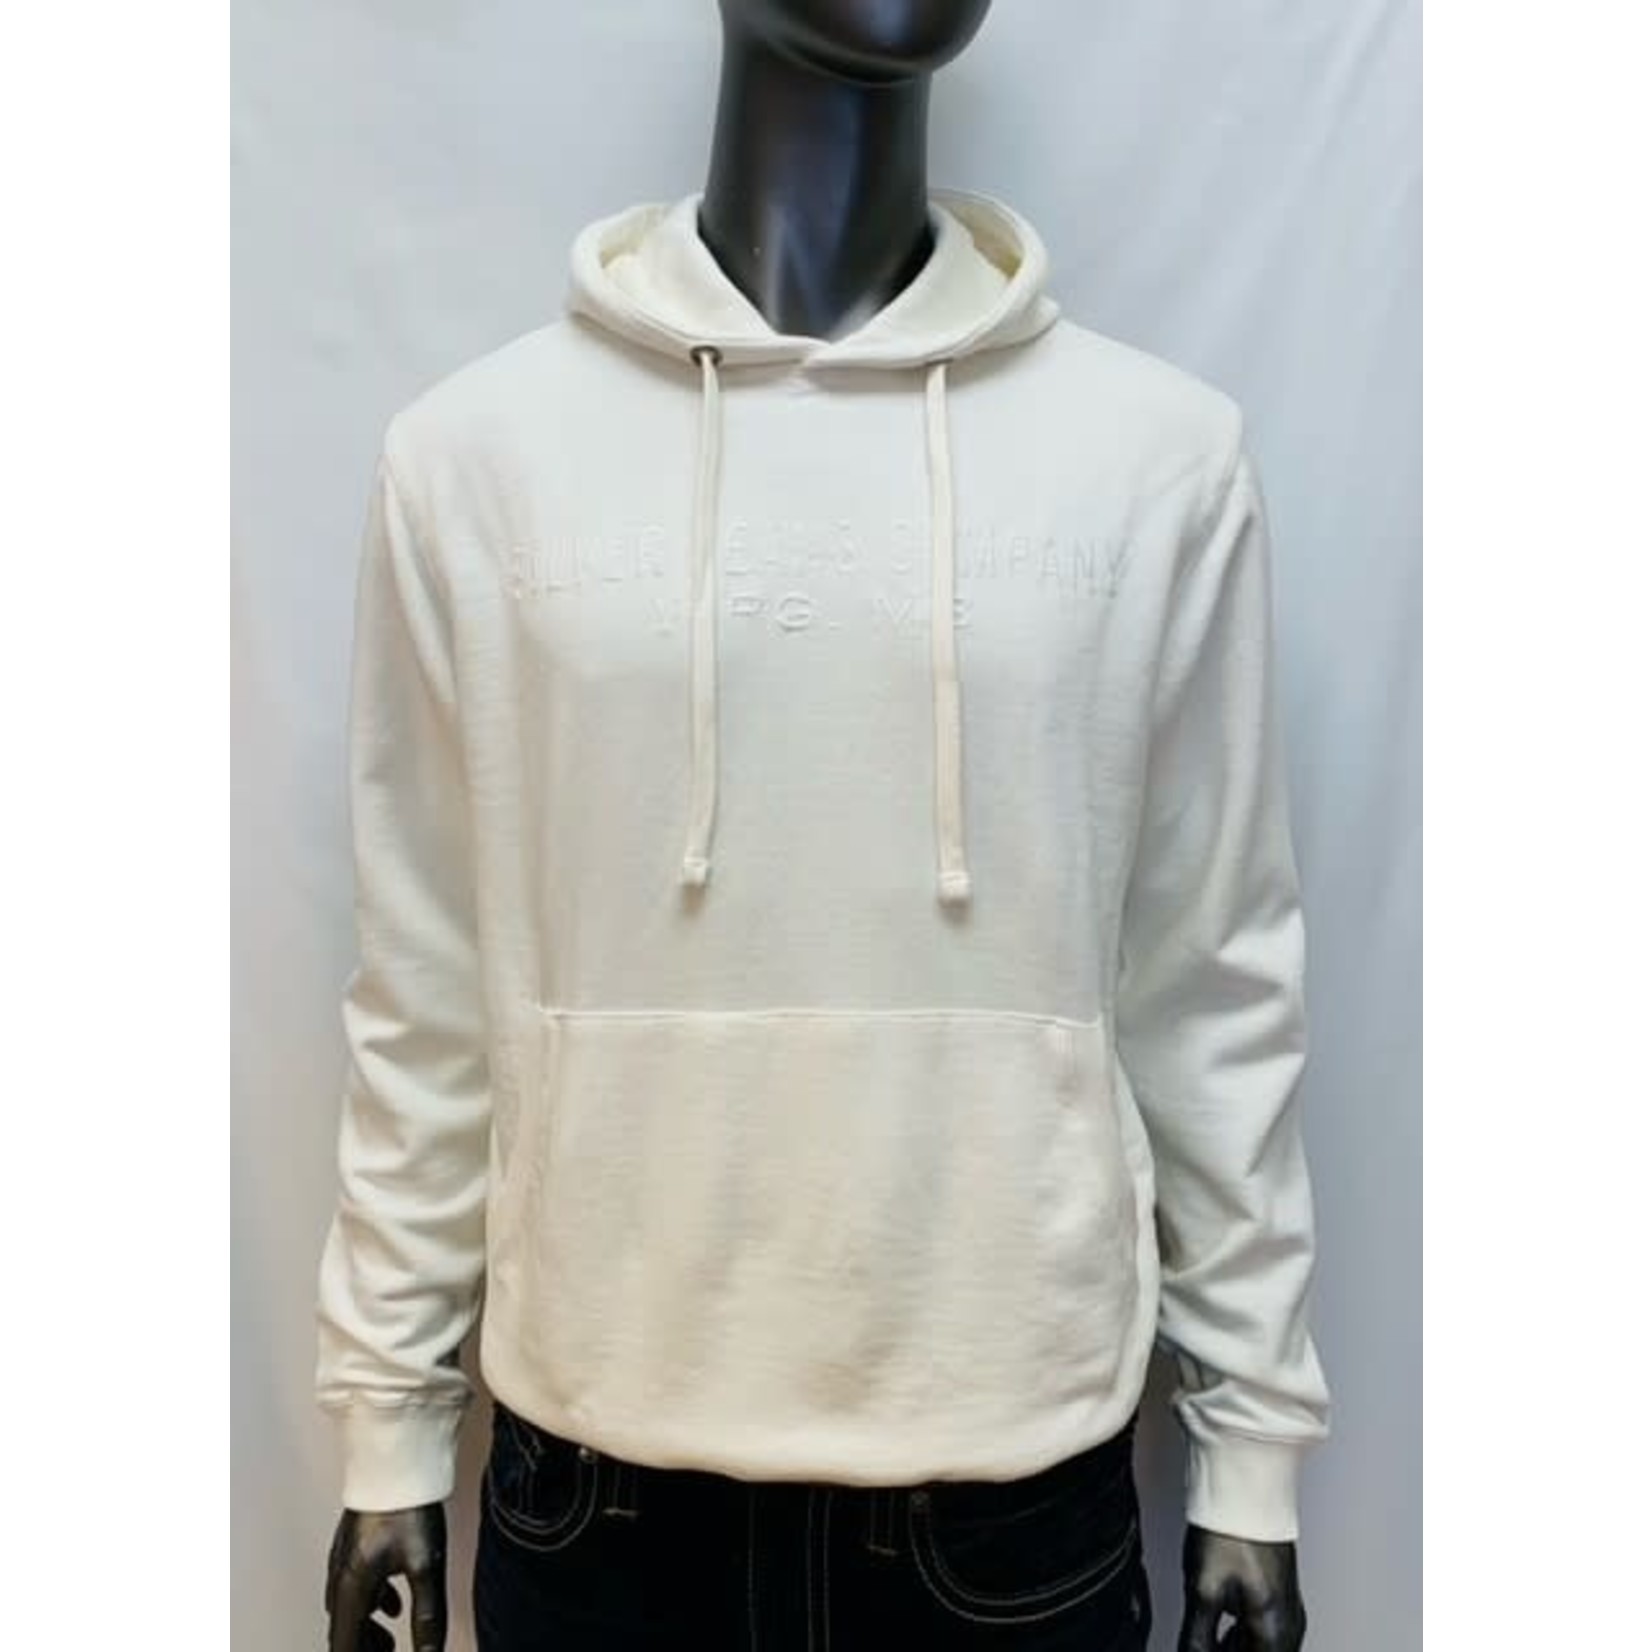 Silver Hoodie Sweaters, comes in multiple colors